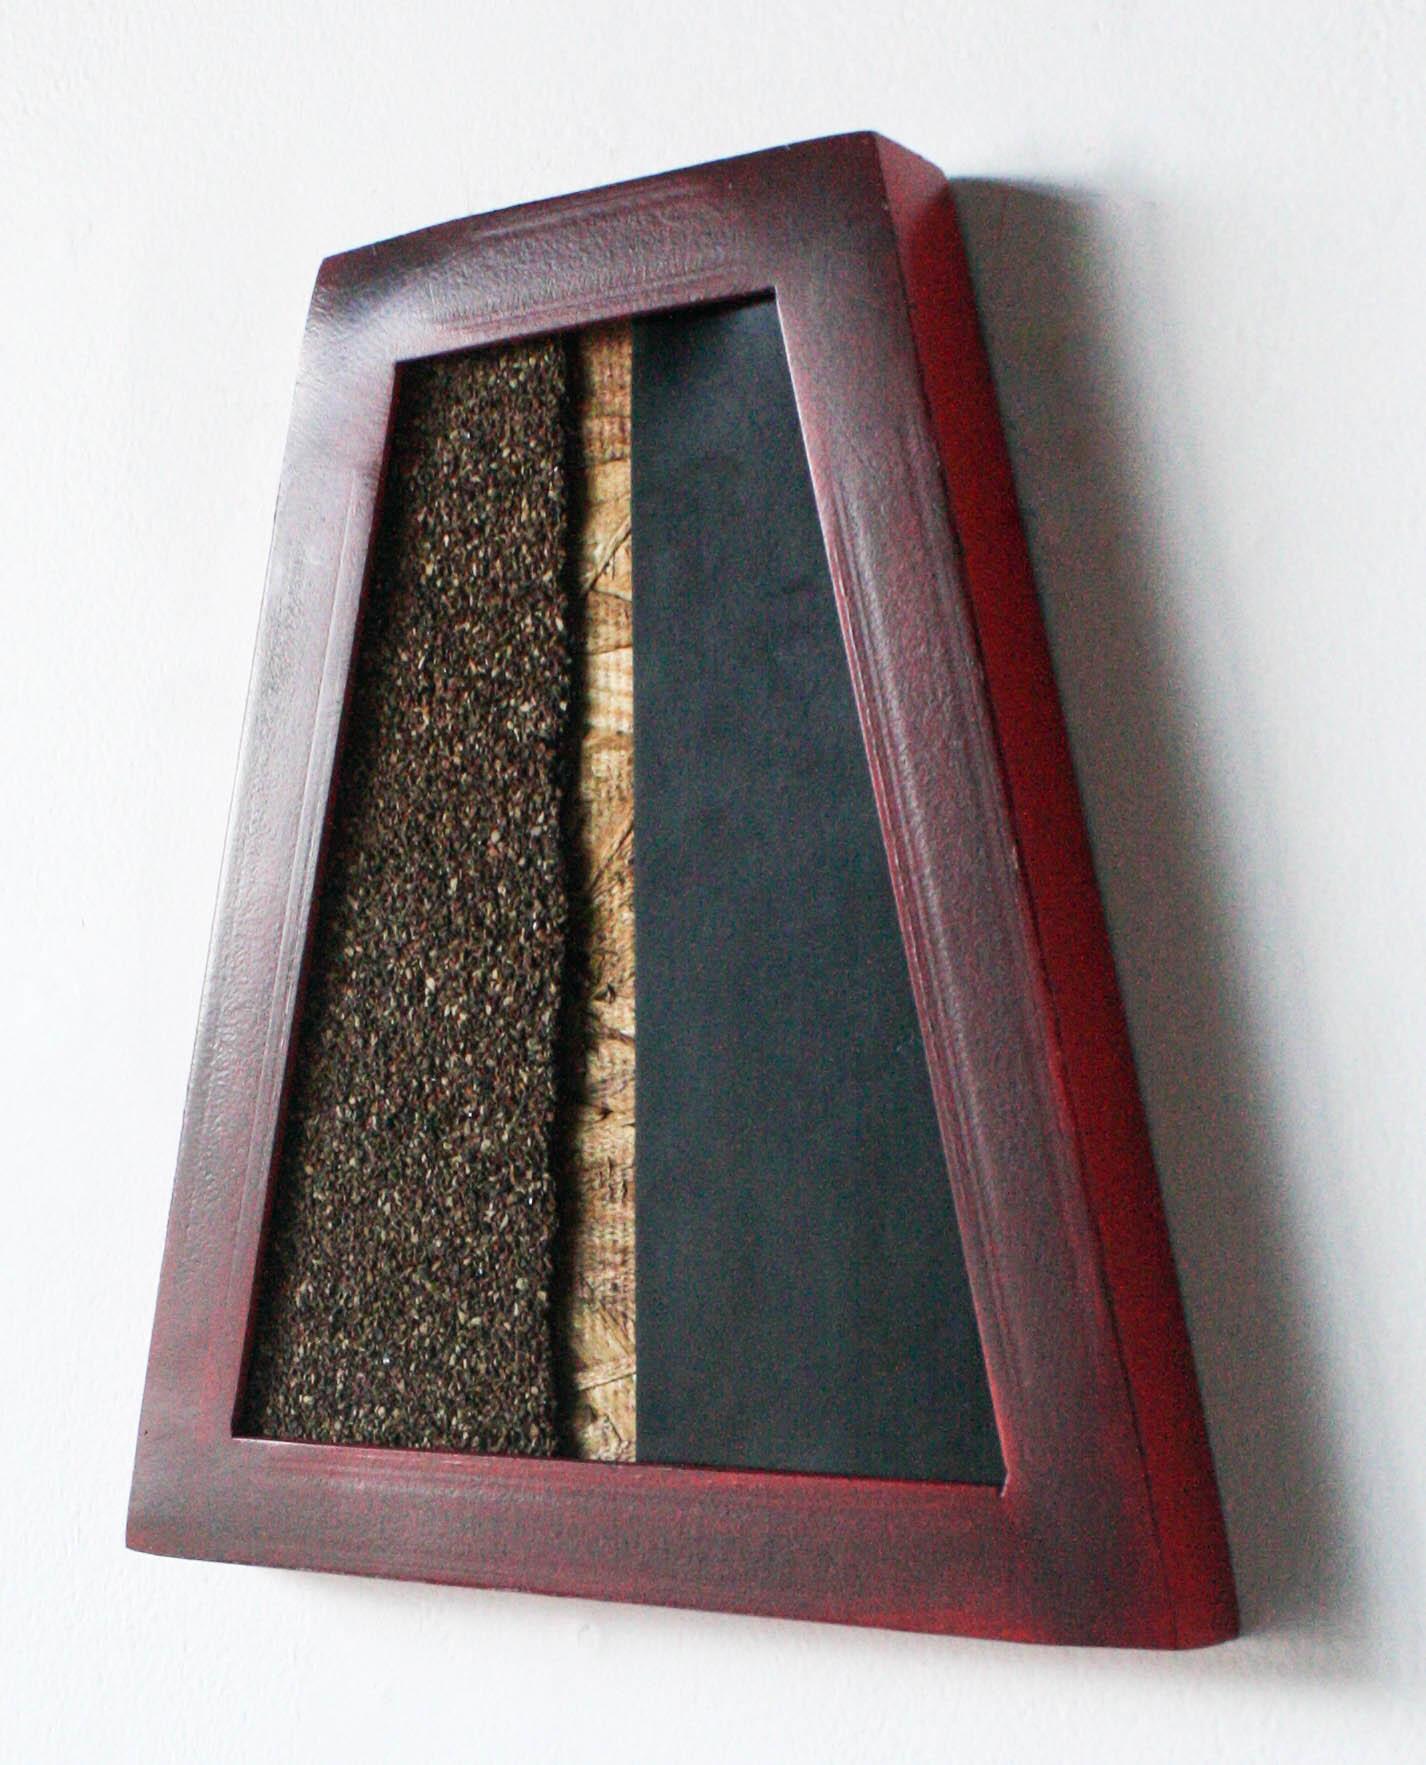 This wall-hanging/wall-mounted sculpture is trapezoidal in shape. Its mixed-media approach yields a variety of textures and colors, from smooth steel to soft rubber and loose graphite. Its mix of red, brown, black, and gray causes it to have the